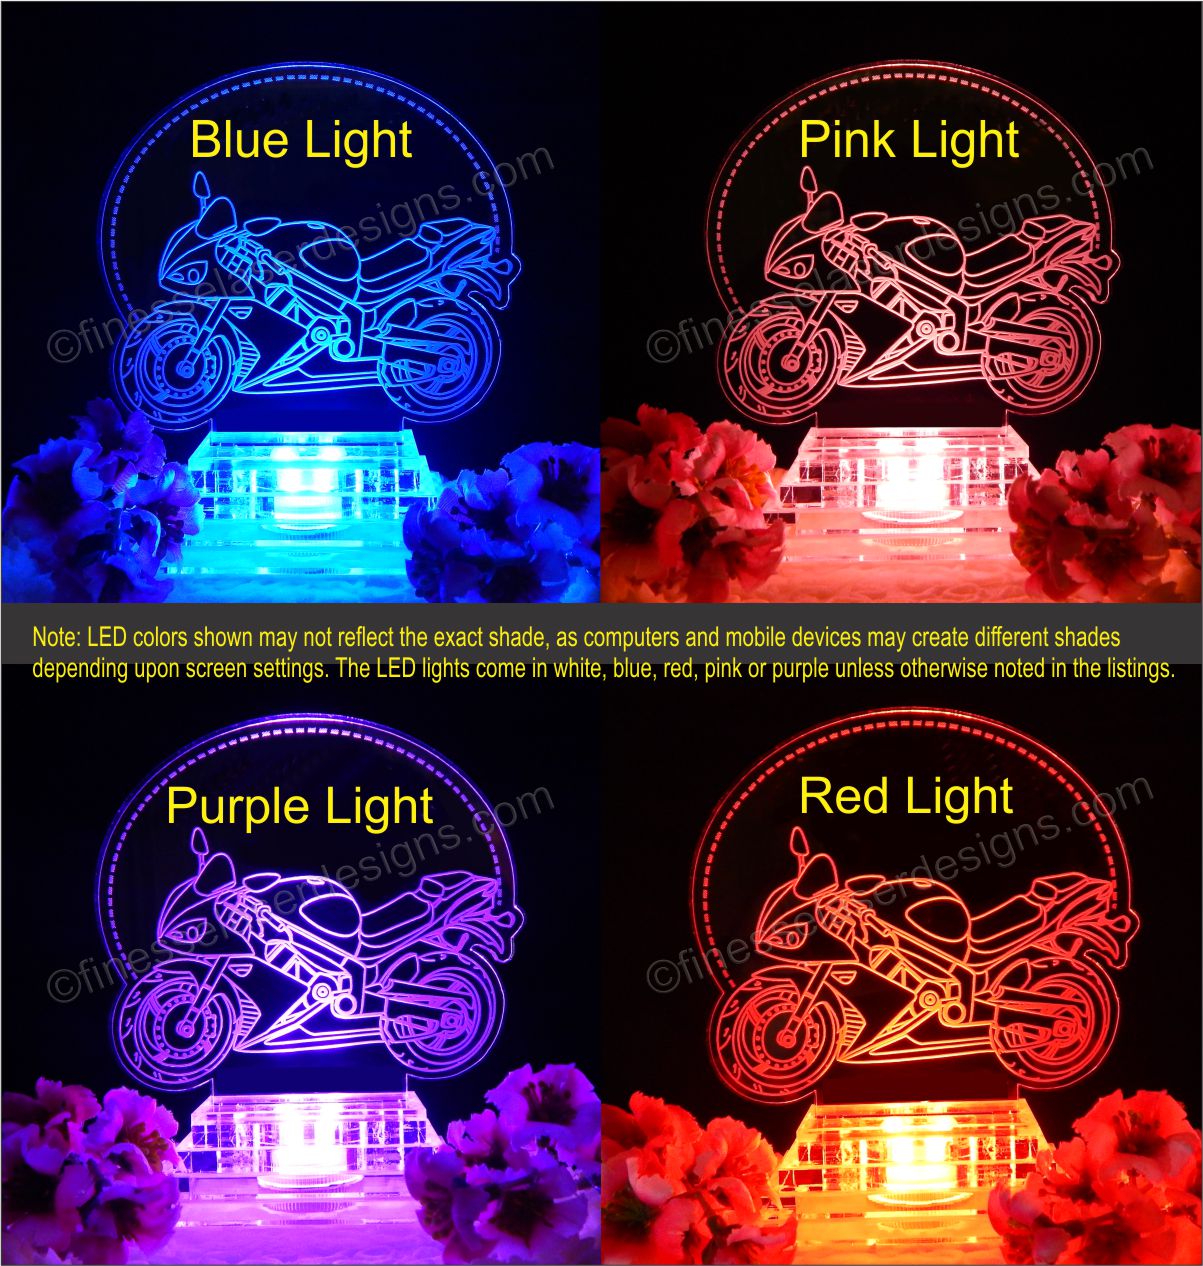 colored views of an acrylic cake topper designed with a side view of a sports motorcycle, with blue, pink, purple and red light views